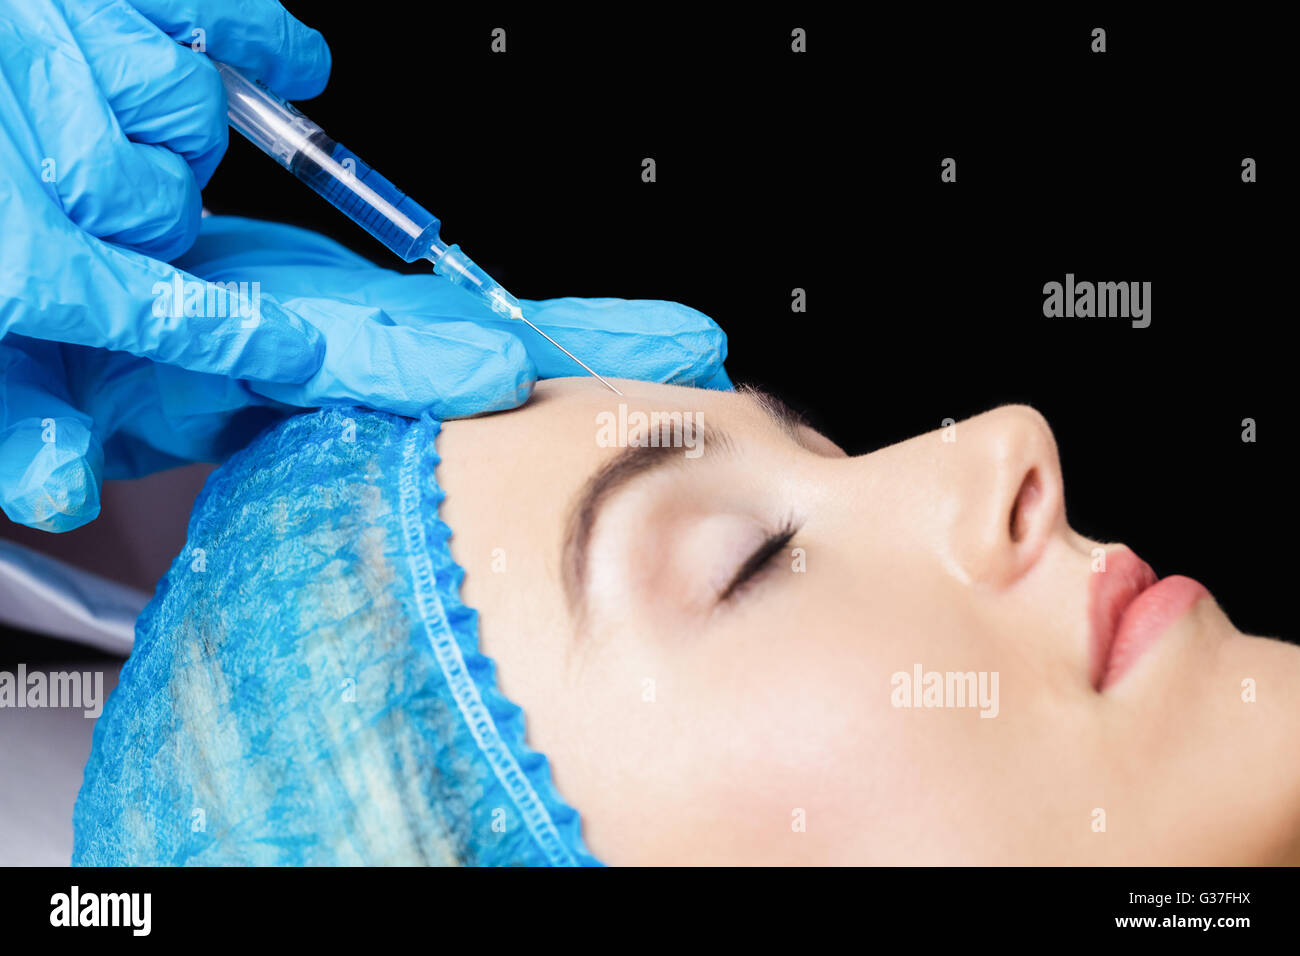 Woman receiving botox injection on her forehead Stock Photo